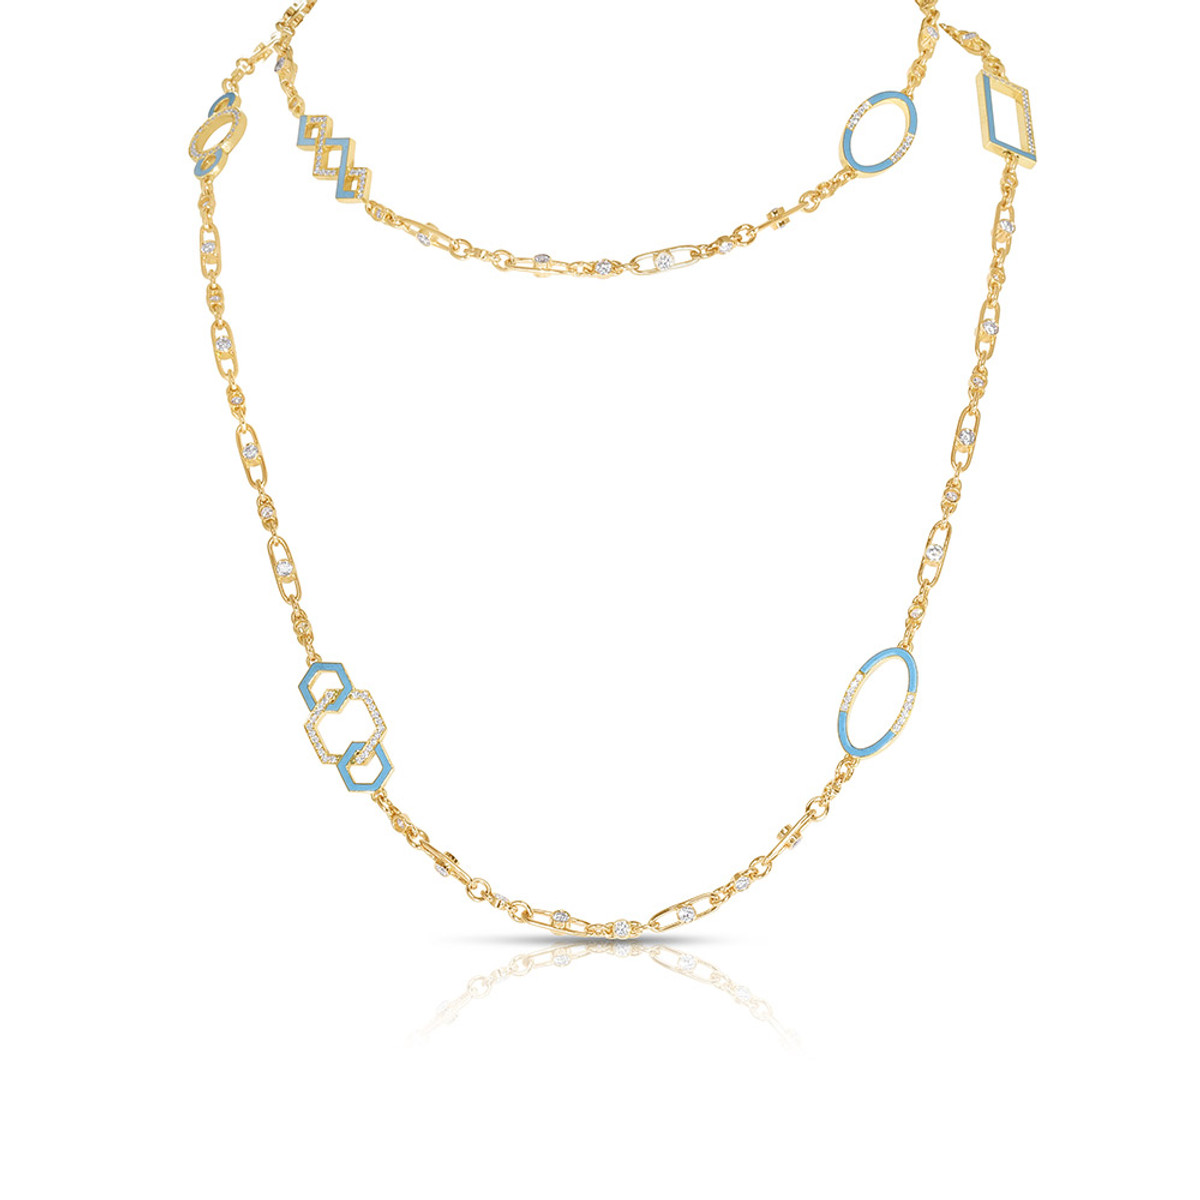 Hyde Park Collection 18K Yellow Gold Diamond & Enamel Station Necklace-62454 Product Image